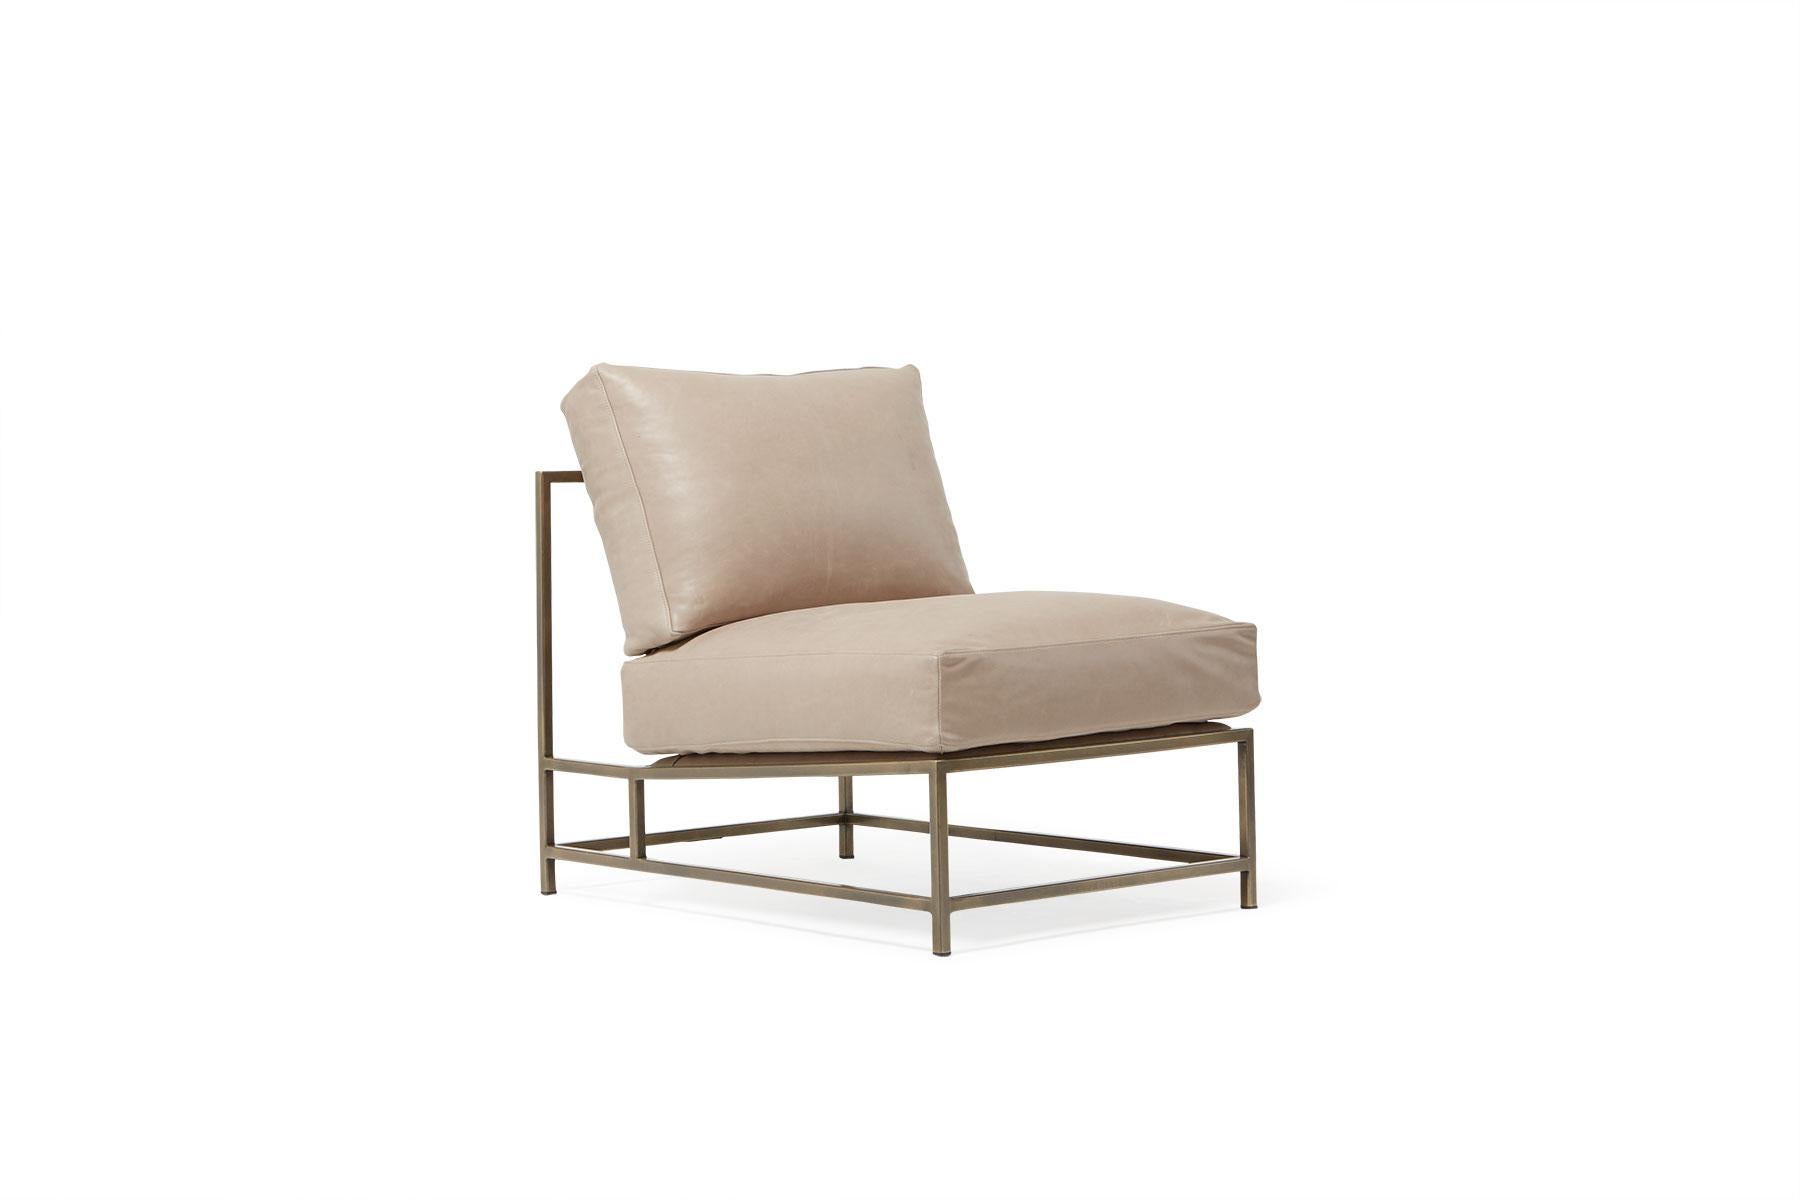 Sleek and refined, the Inheritance Chair is a great addition to nearly any space.

This variation is upholstered in a creamy, light smoke colored leather. The foam seat cushions have been wrapped in down, allowing for a soft and comfortable lounge